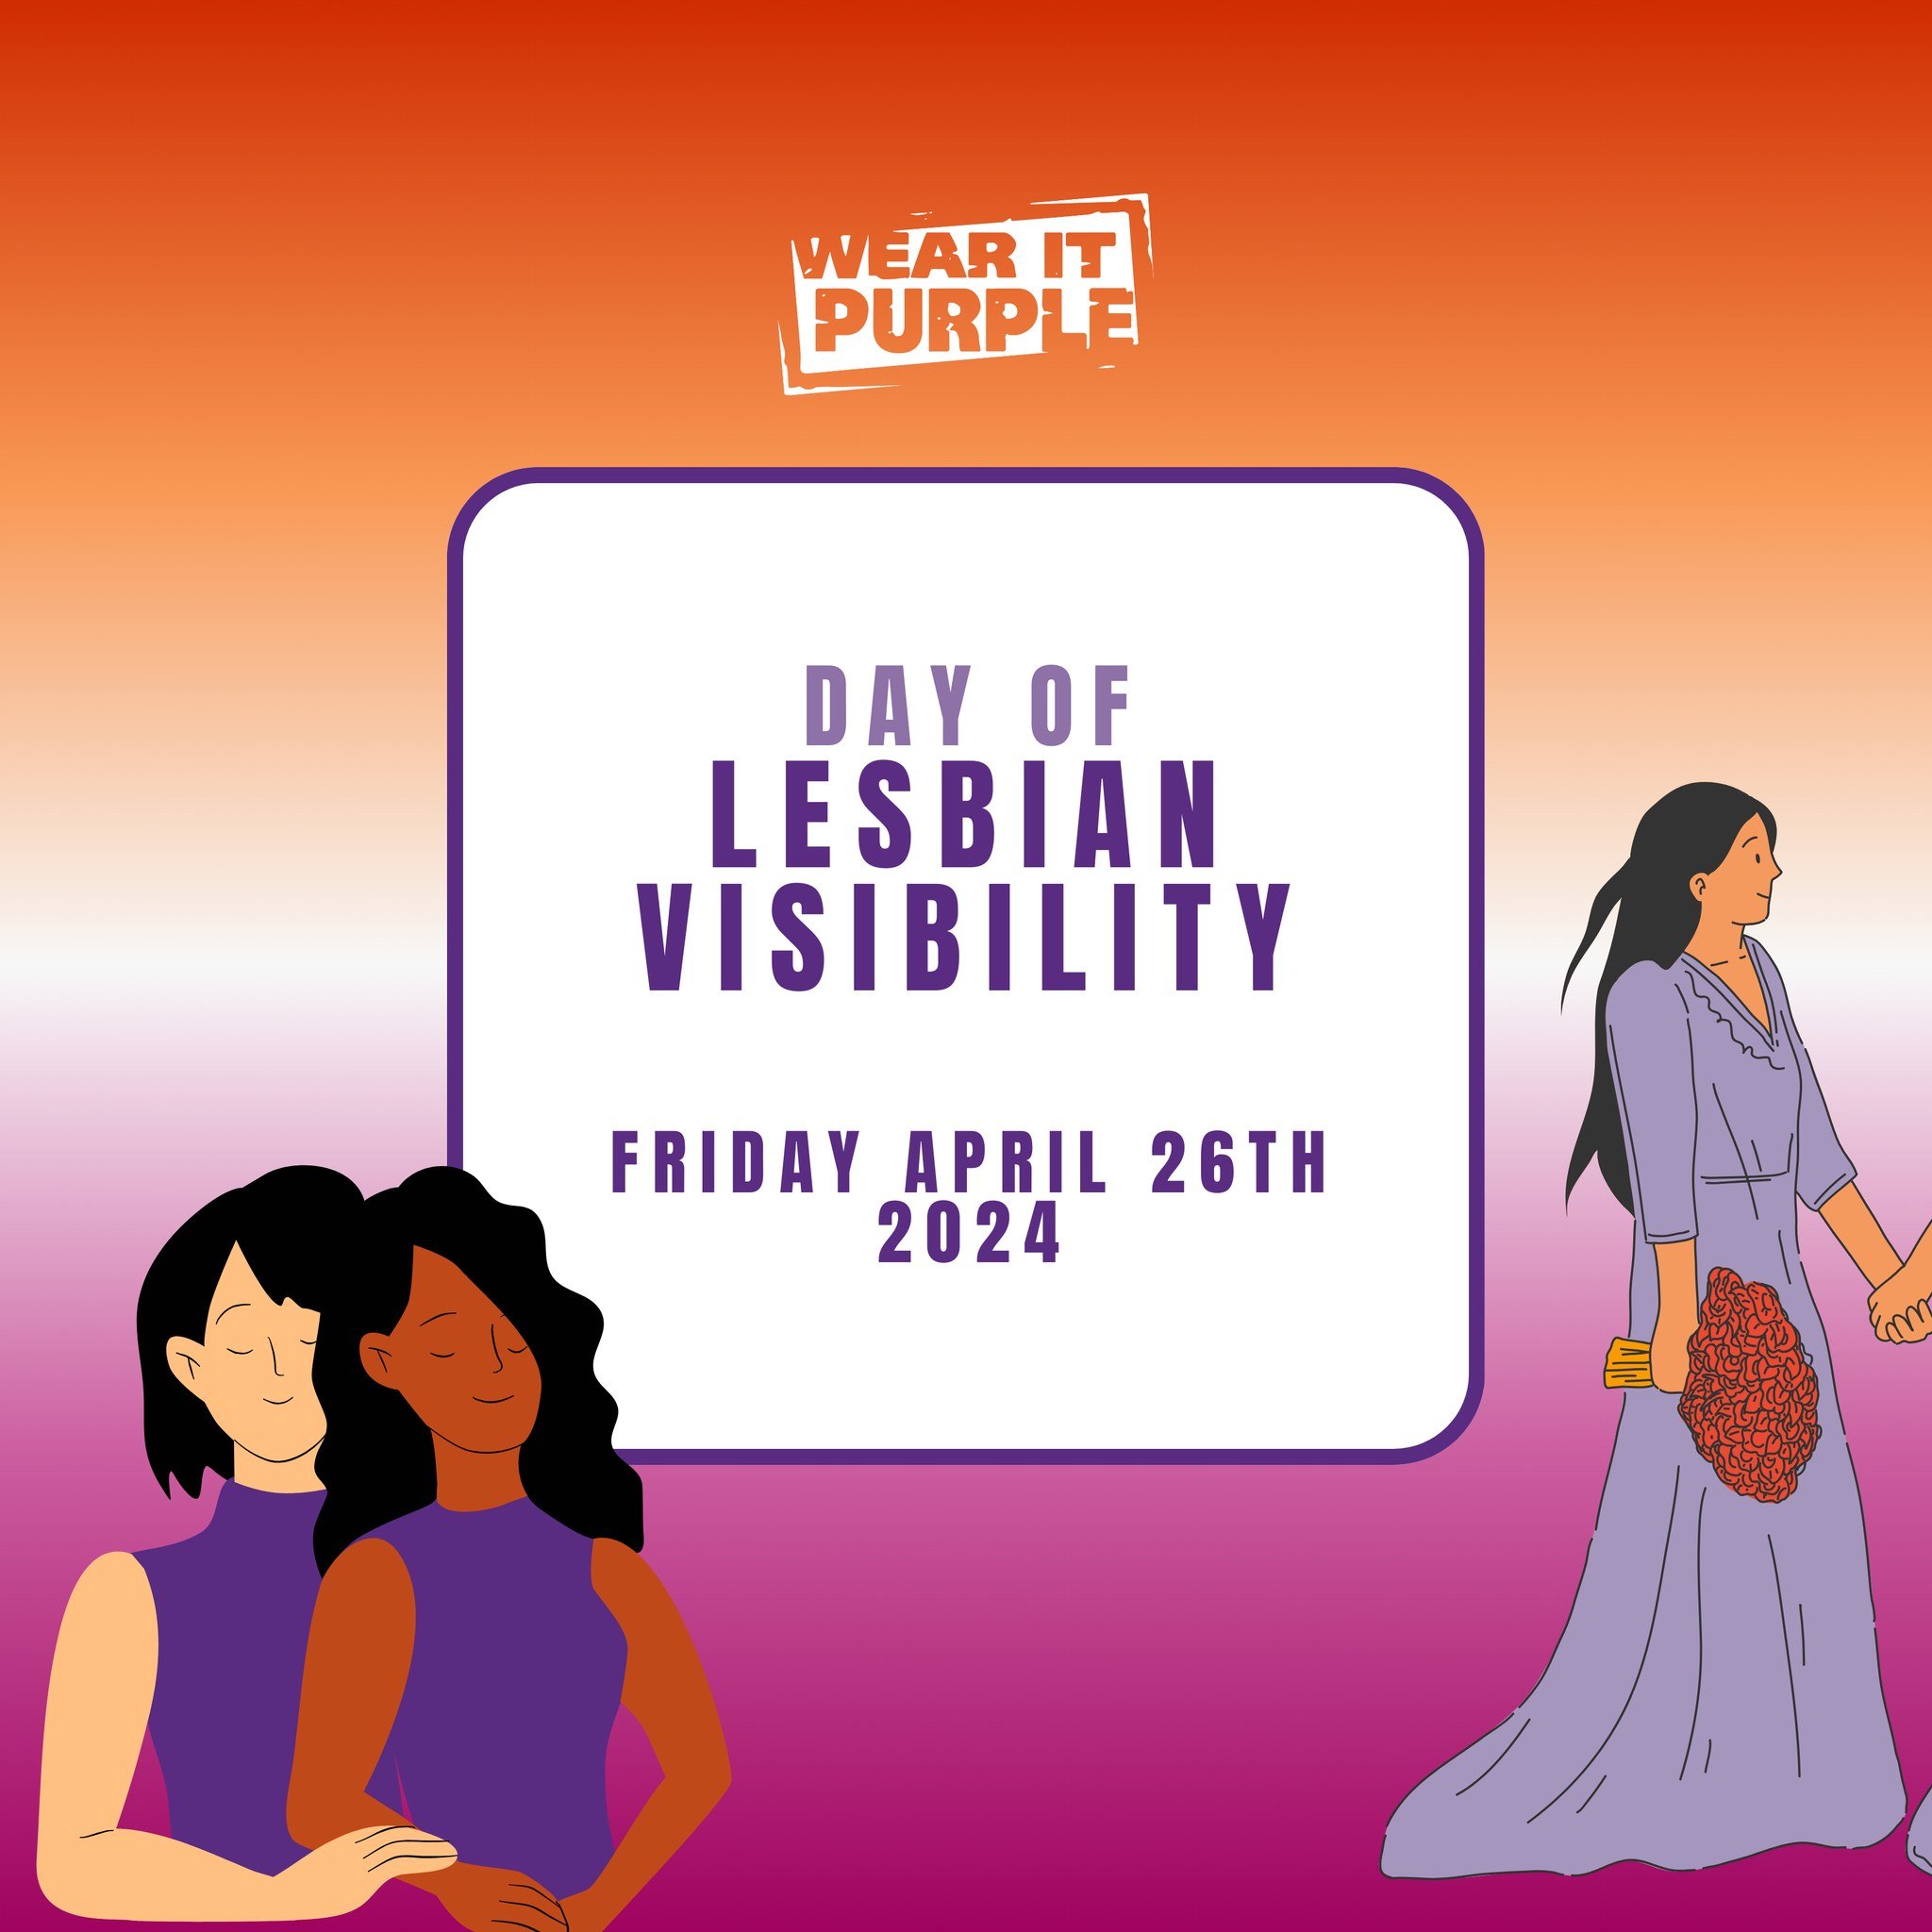 🌈 Happy Lesbian Visibility Day &amp; Week!
❤️🧡🤍🩷💜

This week is all about celebrating lesbian culture and raising visibility. It's a time to raise awareness, share our appreciation and recognise the diverse range of journeys of those who proudly